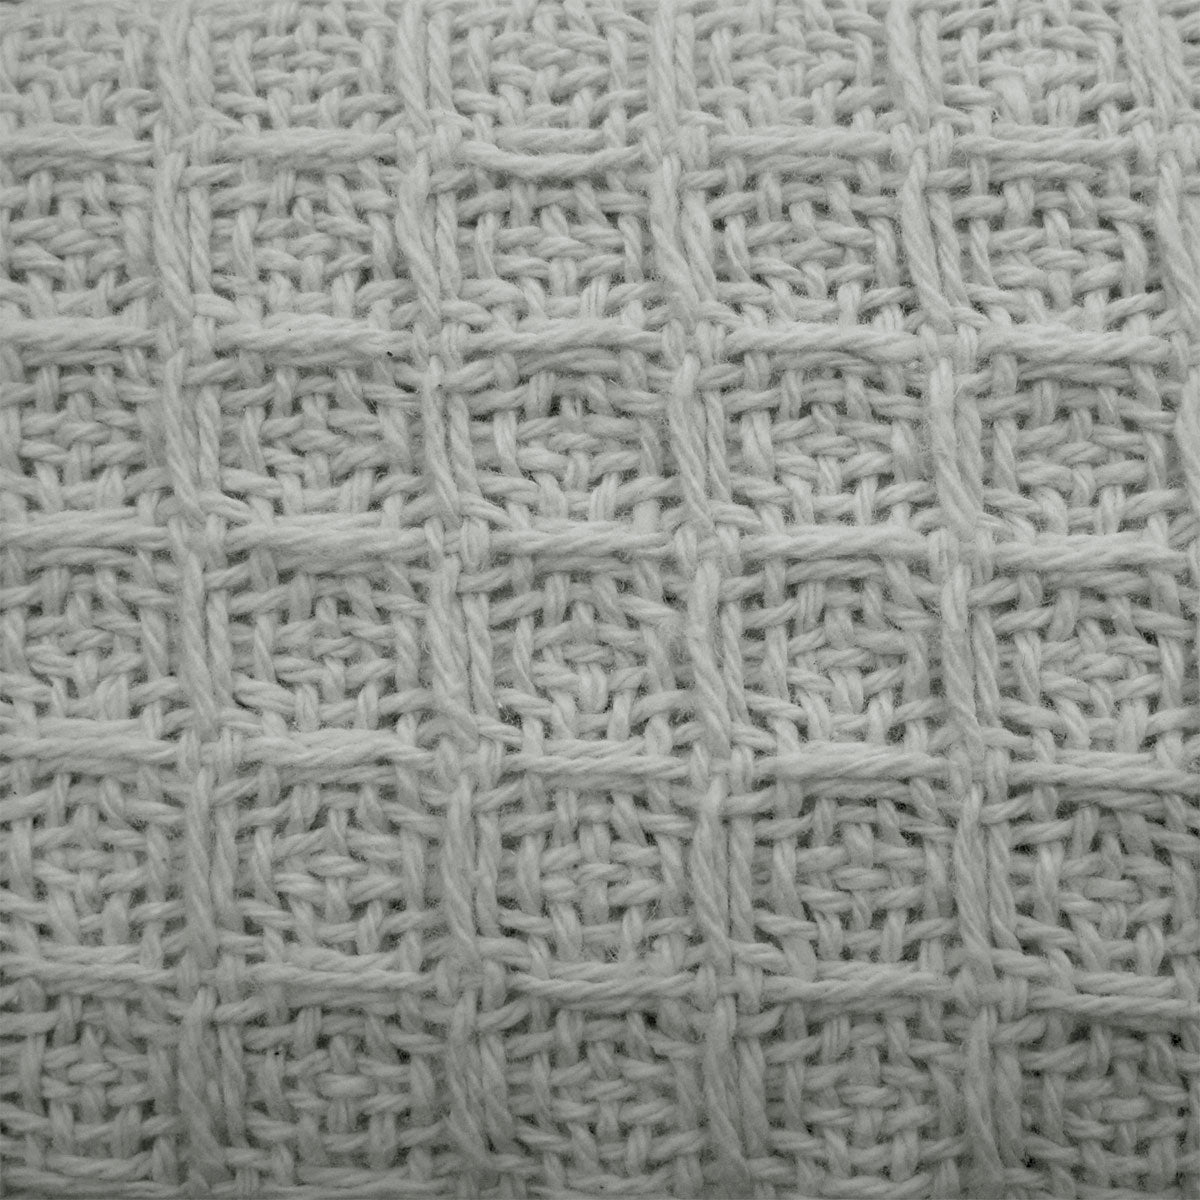 Queen Cotton Waffle Blanket - Silver